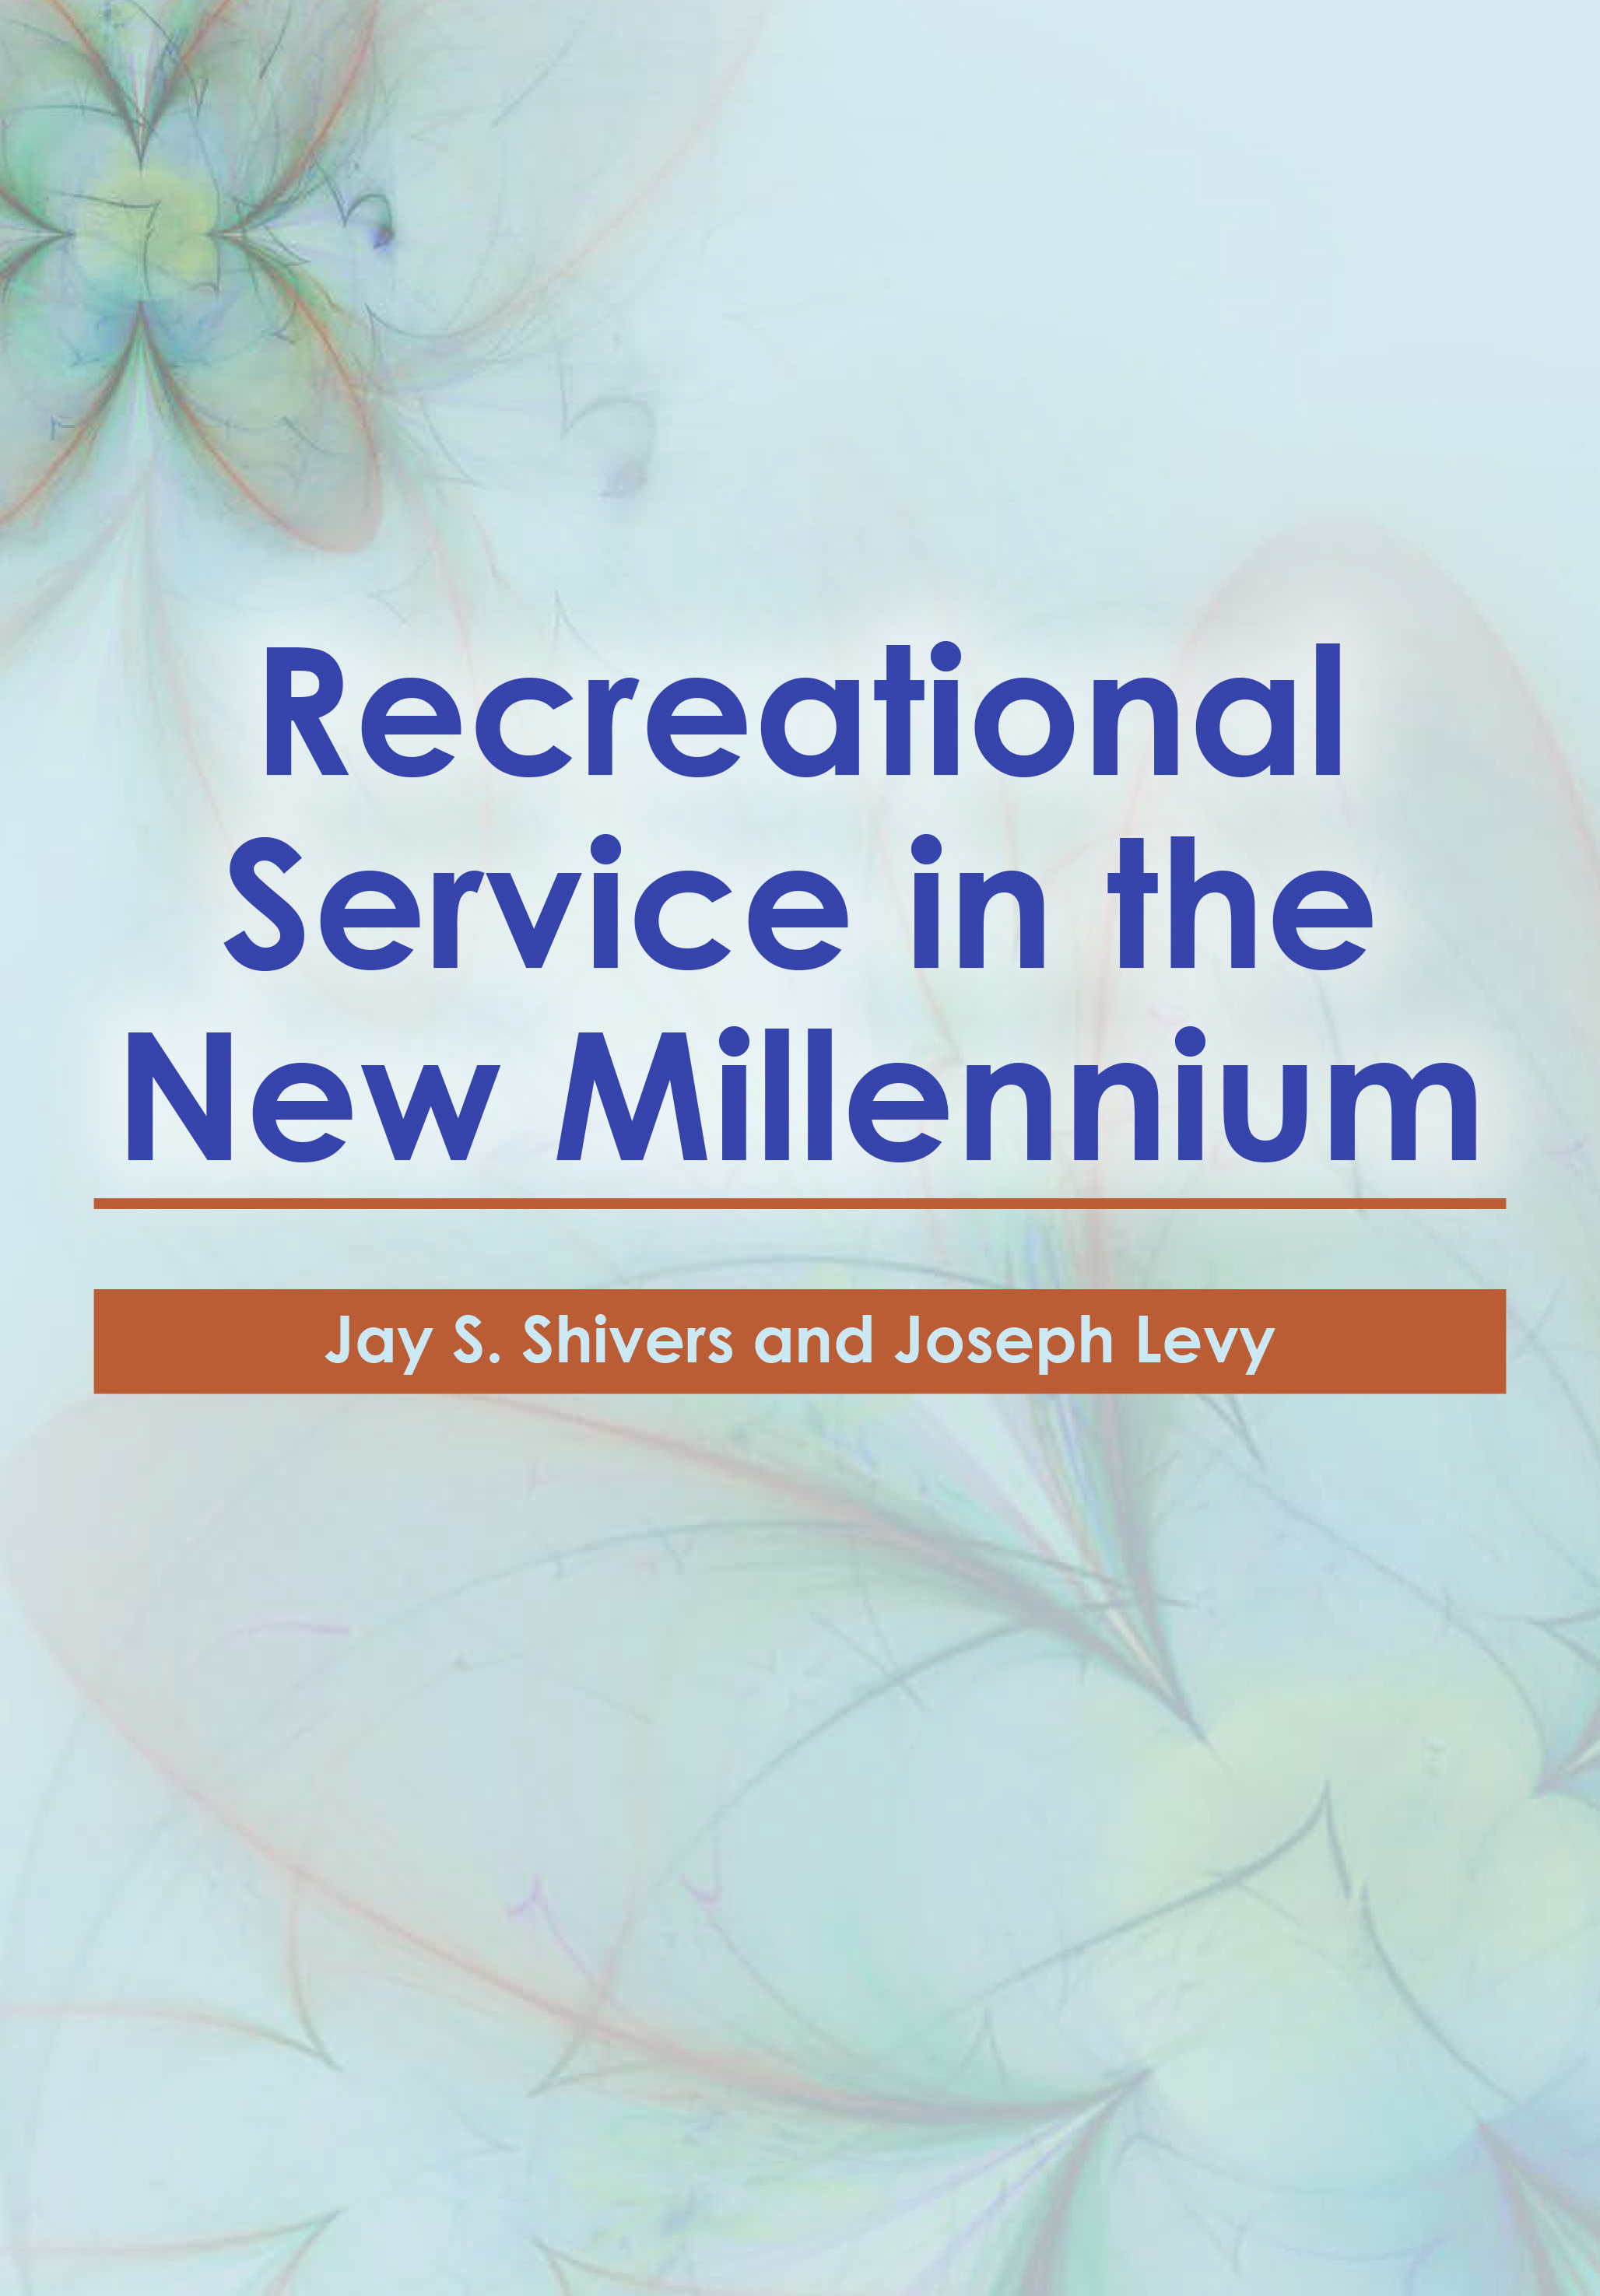 Recreational Service in the New... by: Jay S. Shivers - 9781952815638 |  RedShelf